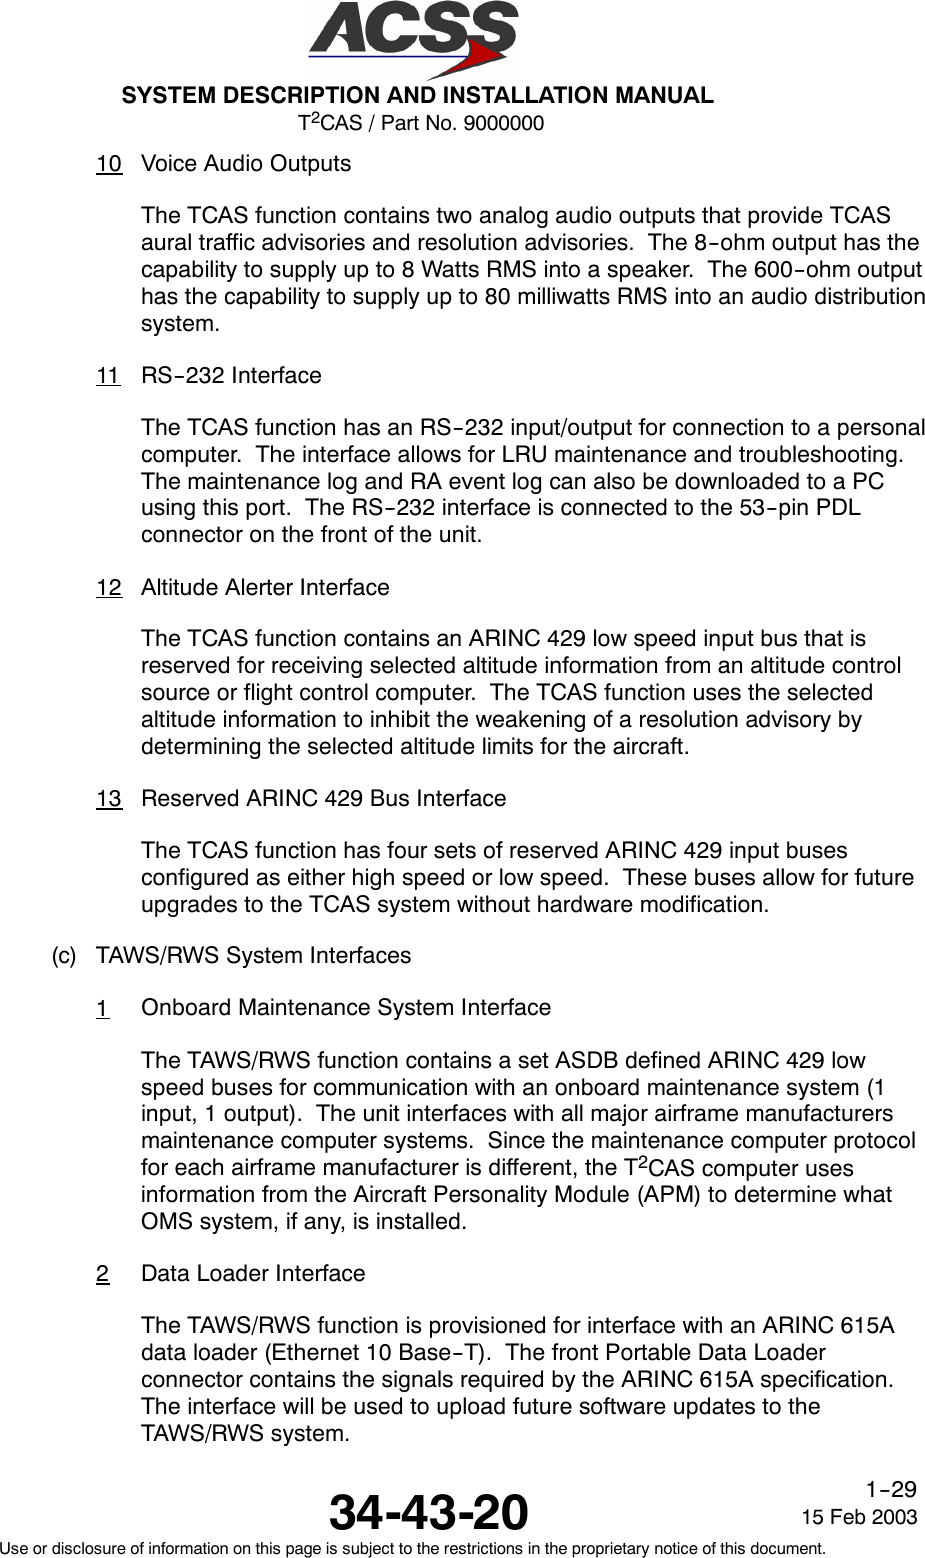 T2CAS / Part No. 9000000SYSTEM DESCRIPTION AND INSTALLATION MANUAL34-43-20 15 Feb 2003Use or disclosure of information on this page is subject to the restrictions in the proprietary notice of this document.1--2910 Voice Audio OutputsThe TCAS function contains two analog audio outputs that provide TCASaural traffic advisories and resolution advisories. The 8--ohm output has thecapability to supply up to 8 Watts RMS into a speaker. The 600--ohm outputhas the capability to supply up to 80 milliwatts RMS into an audio distributionsystem.11 RS--232 InterfaceThe TCAS function has an RS--232 input/output for connection to a personalcomputer. The interface allows for LRU maintenance and troubleshooting.The maintenance log and RA event log can also be downloaded to a PCusing this port. The RS--232 interface is connected to the 53--pin PDLconnector on the front of the unit.12 Altitude Alerter InterfaceThe TCAS function contains an ARINC 429 low speed input bus that isreserved for receiving selected altitude information from an altitude controlsource or flight control computer. The TCAS function uses the selectedaltitude information to inhibit the weakening of a resolution advisory bydetermining the selected altitude limits for the aircraft.13 Reserved ARINC 429 Bus InterfaceThe TCAS function has four sets of reserved ARINC 429 input busesconfigured as either high speed or low speed. These buses allow for futureupgrades to the TCAS system without hardware modification.(c) TAWS/RWS System Interfaces1Onboard Maintenance System InterfaceThe TAWS/RWS function contains a set ASDB defined ARINC 429 lowspeed buses for communication with an onboard maintenance system (1input, 1 output). The unit interfaces with all major airframe manufacturersmaintenance computer systems. Since the maintenance computer protocolfor each airframe manufacturer is different, the T2CAS computer usesinformation from the Aircraft Personality Module (APM) to determine whatOMS system, if any, is installed.2Data Loader InterfaceThe TAWS/RWS function is provisioned for interface with an ARINC 615Adata loader (Ethernet 10 Base--T). The front Portable Data Loaderconnector contains the signals required by the ARINC 615A specification.The interface will be used to upload future software updates to theTAWS/RWS system.